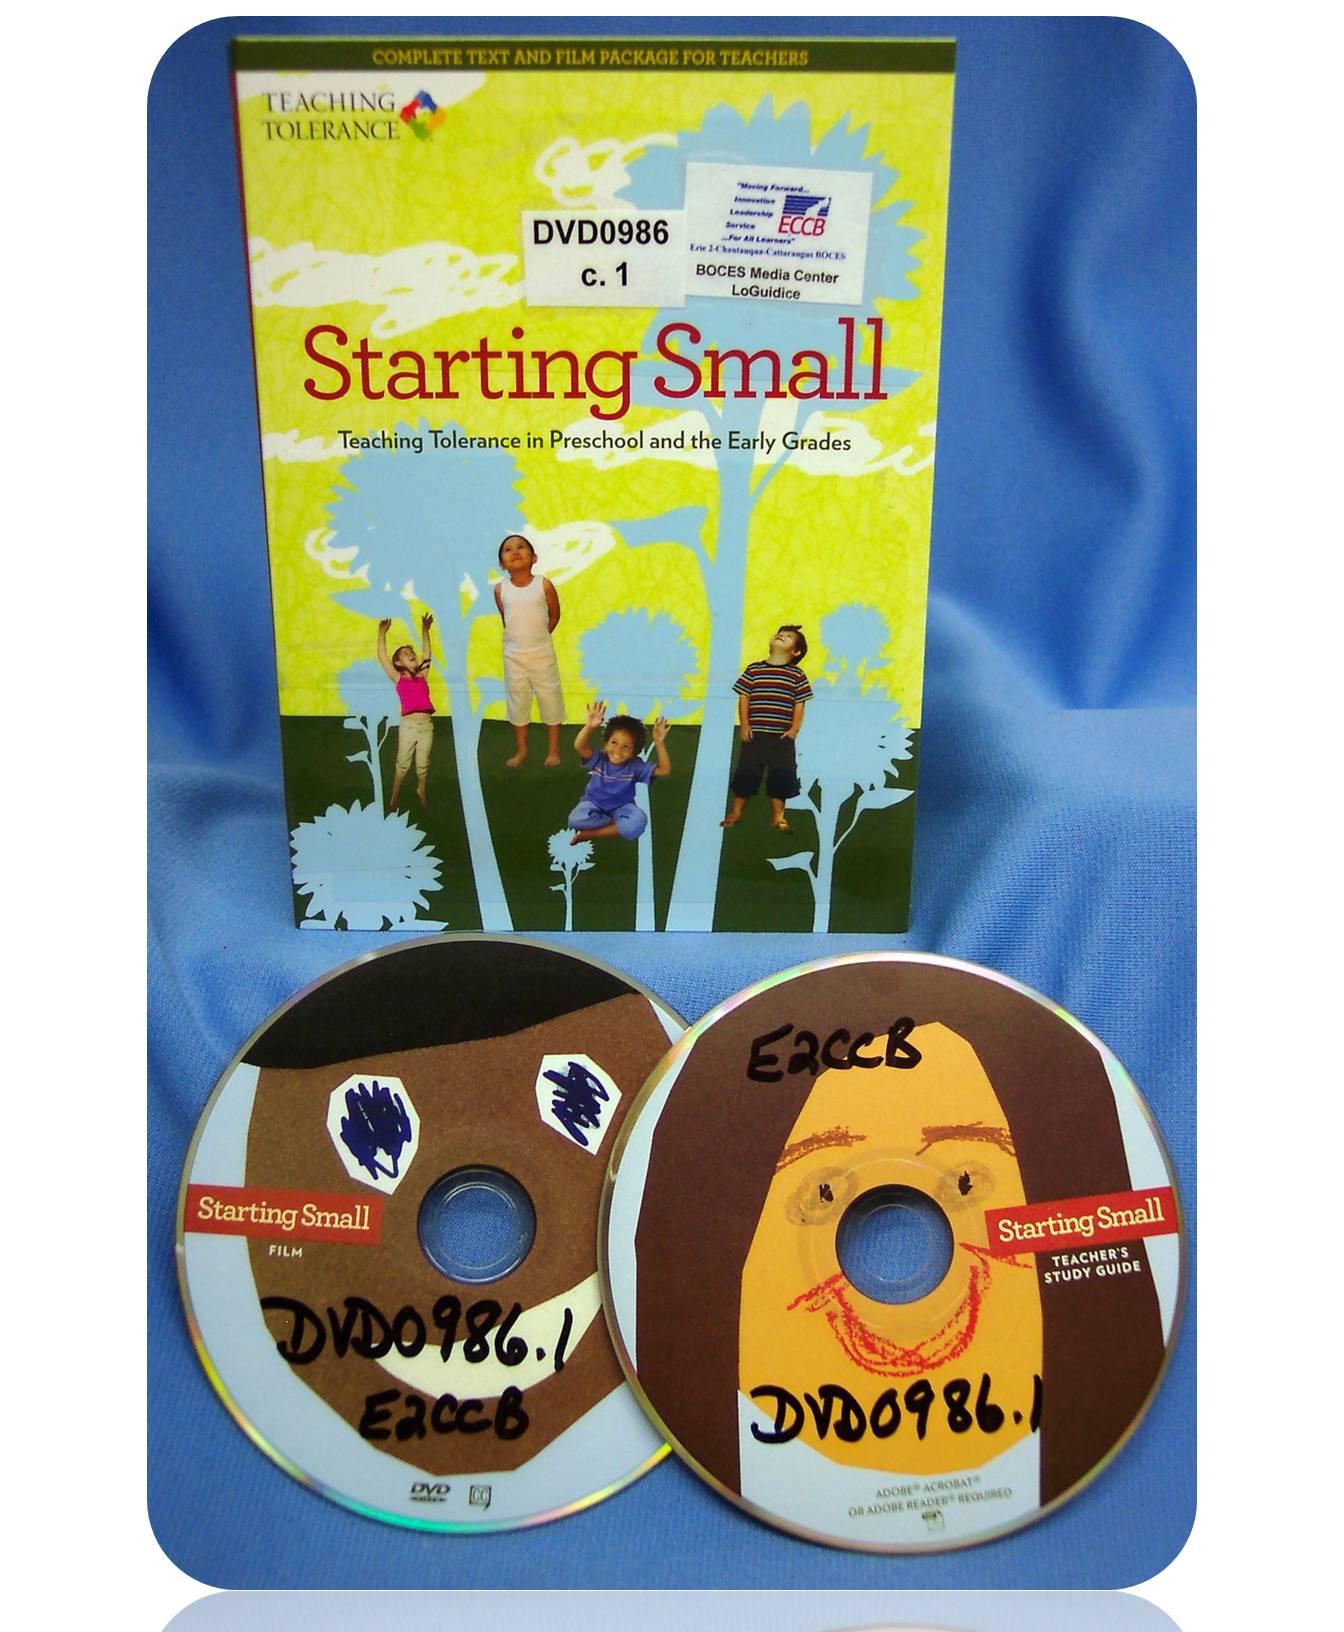 Starting Small: Teaching Tolerance in Preschool and the Early Grades